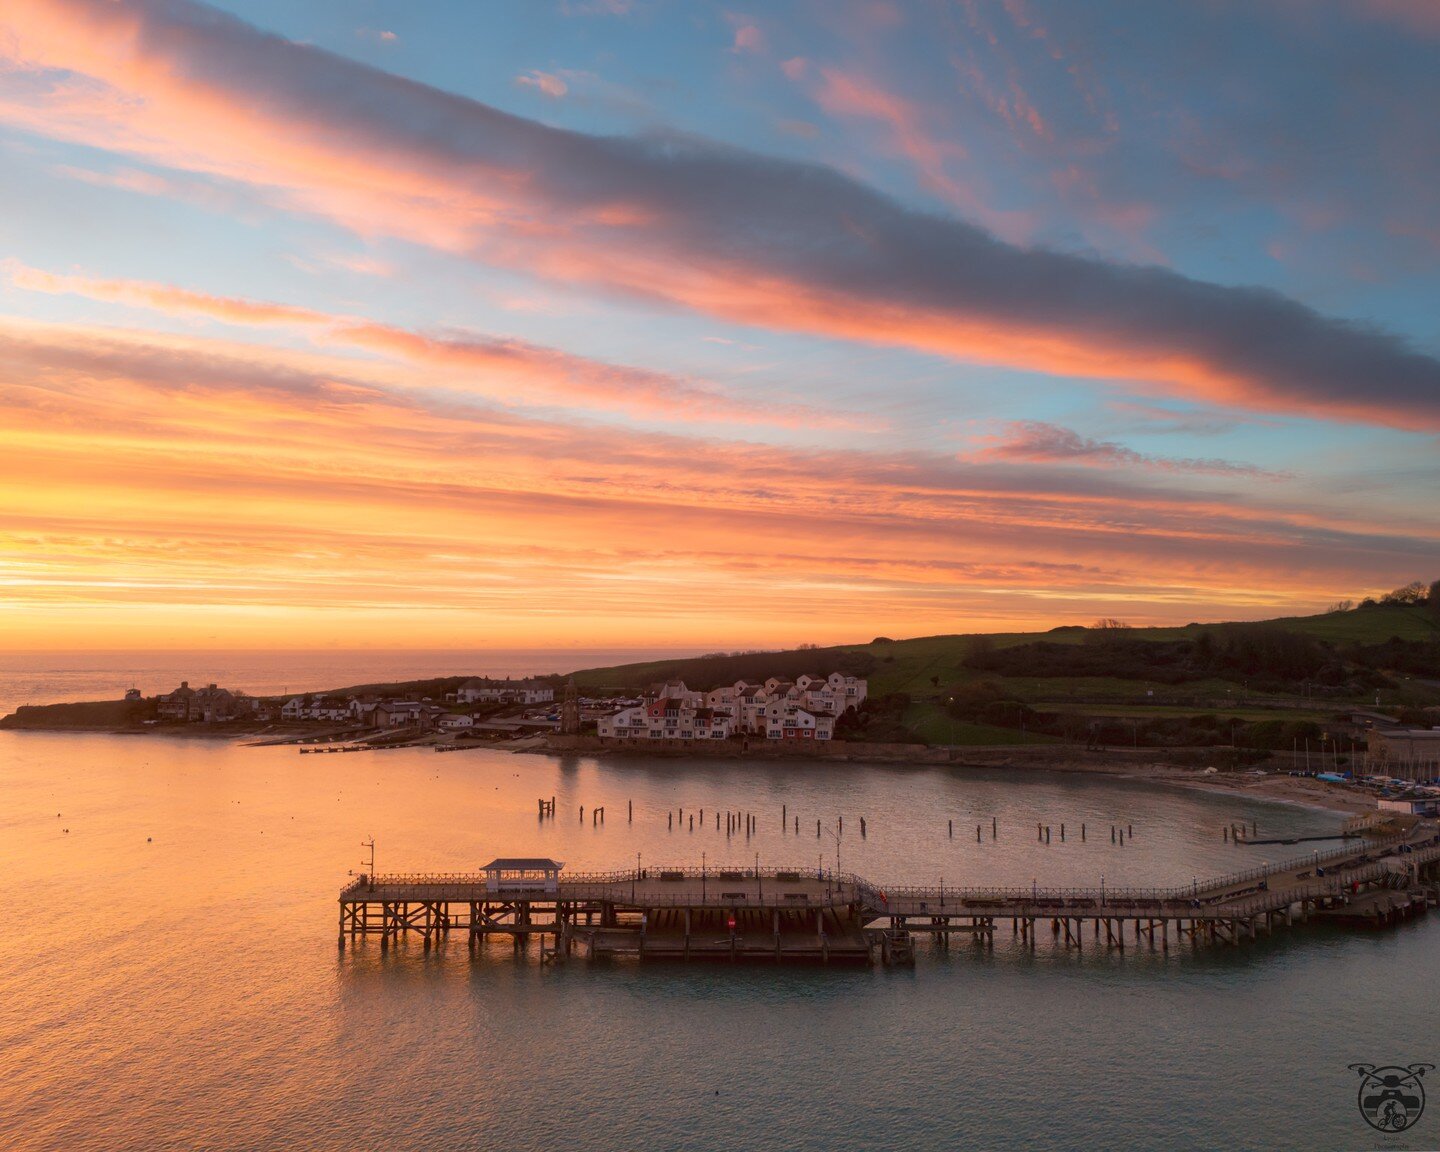 Nice to see some colour in the skies before work this week. Quick opportunity to fire the drone up over the bay and capture this place I'm fortunate to call home 
#lovewhereyoulive 
#dorset 
#swanage 
#drone